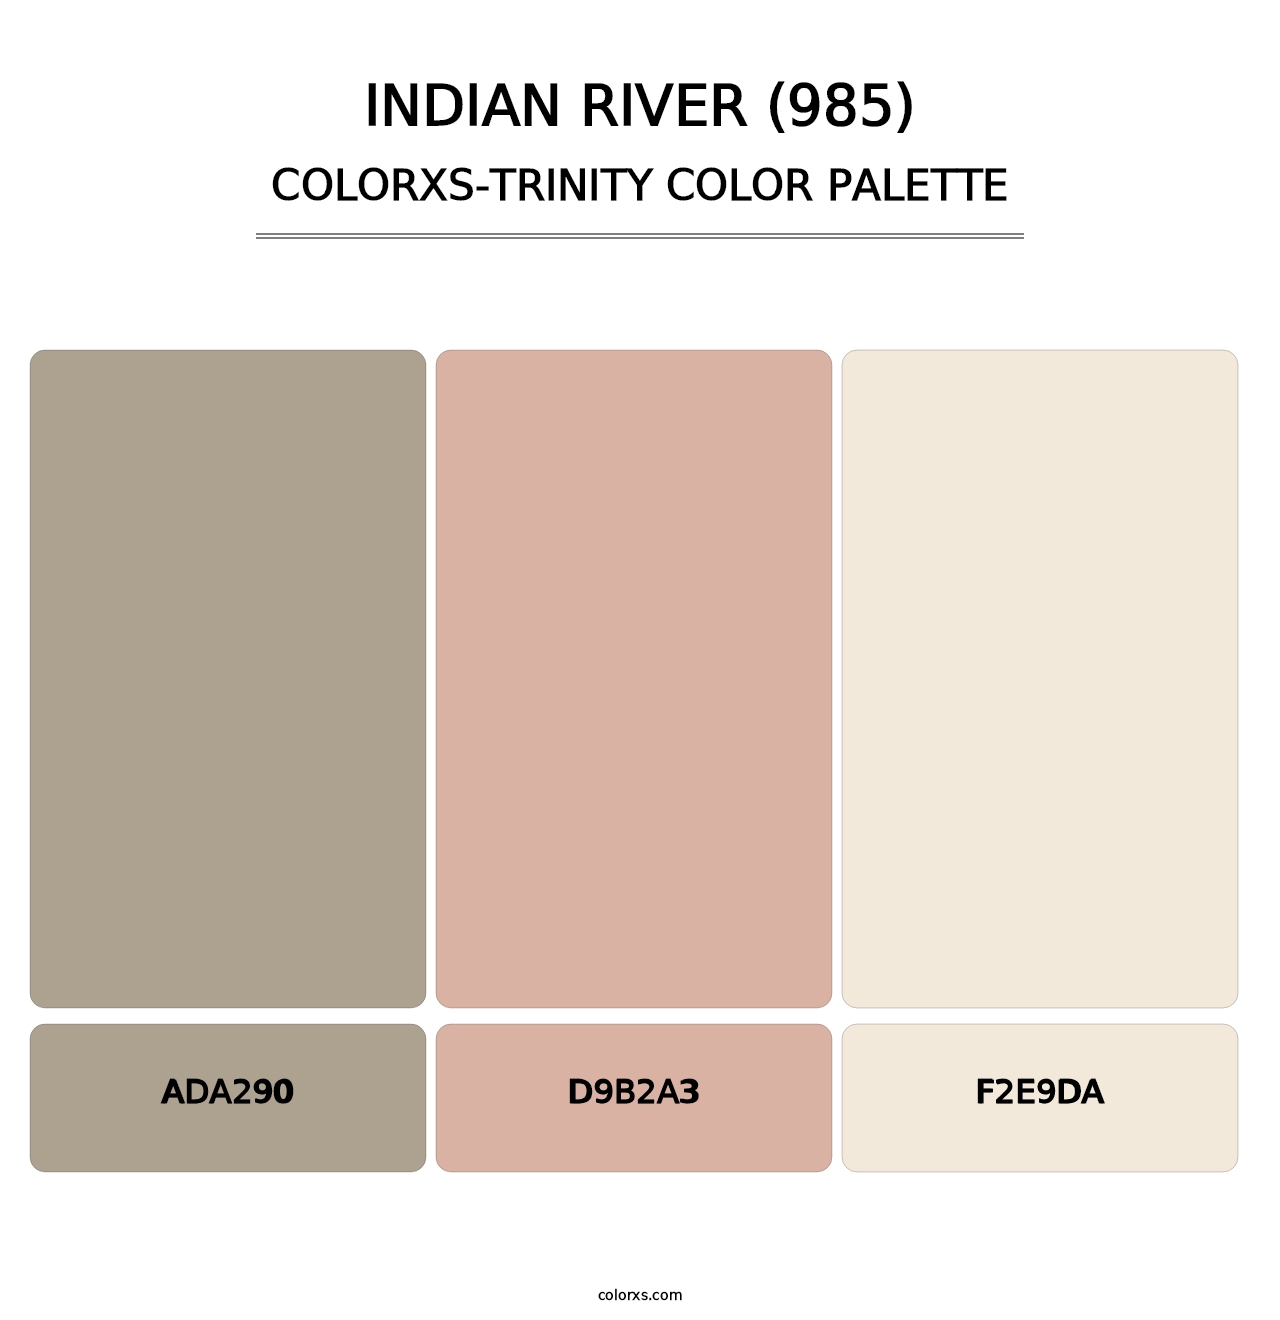 Indian River (985) - Colorxs Trinity Palette